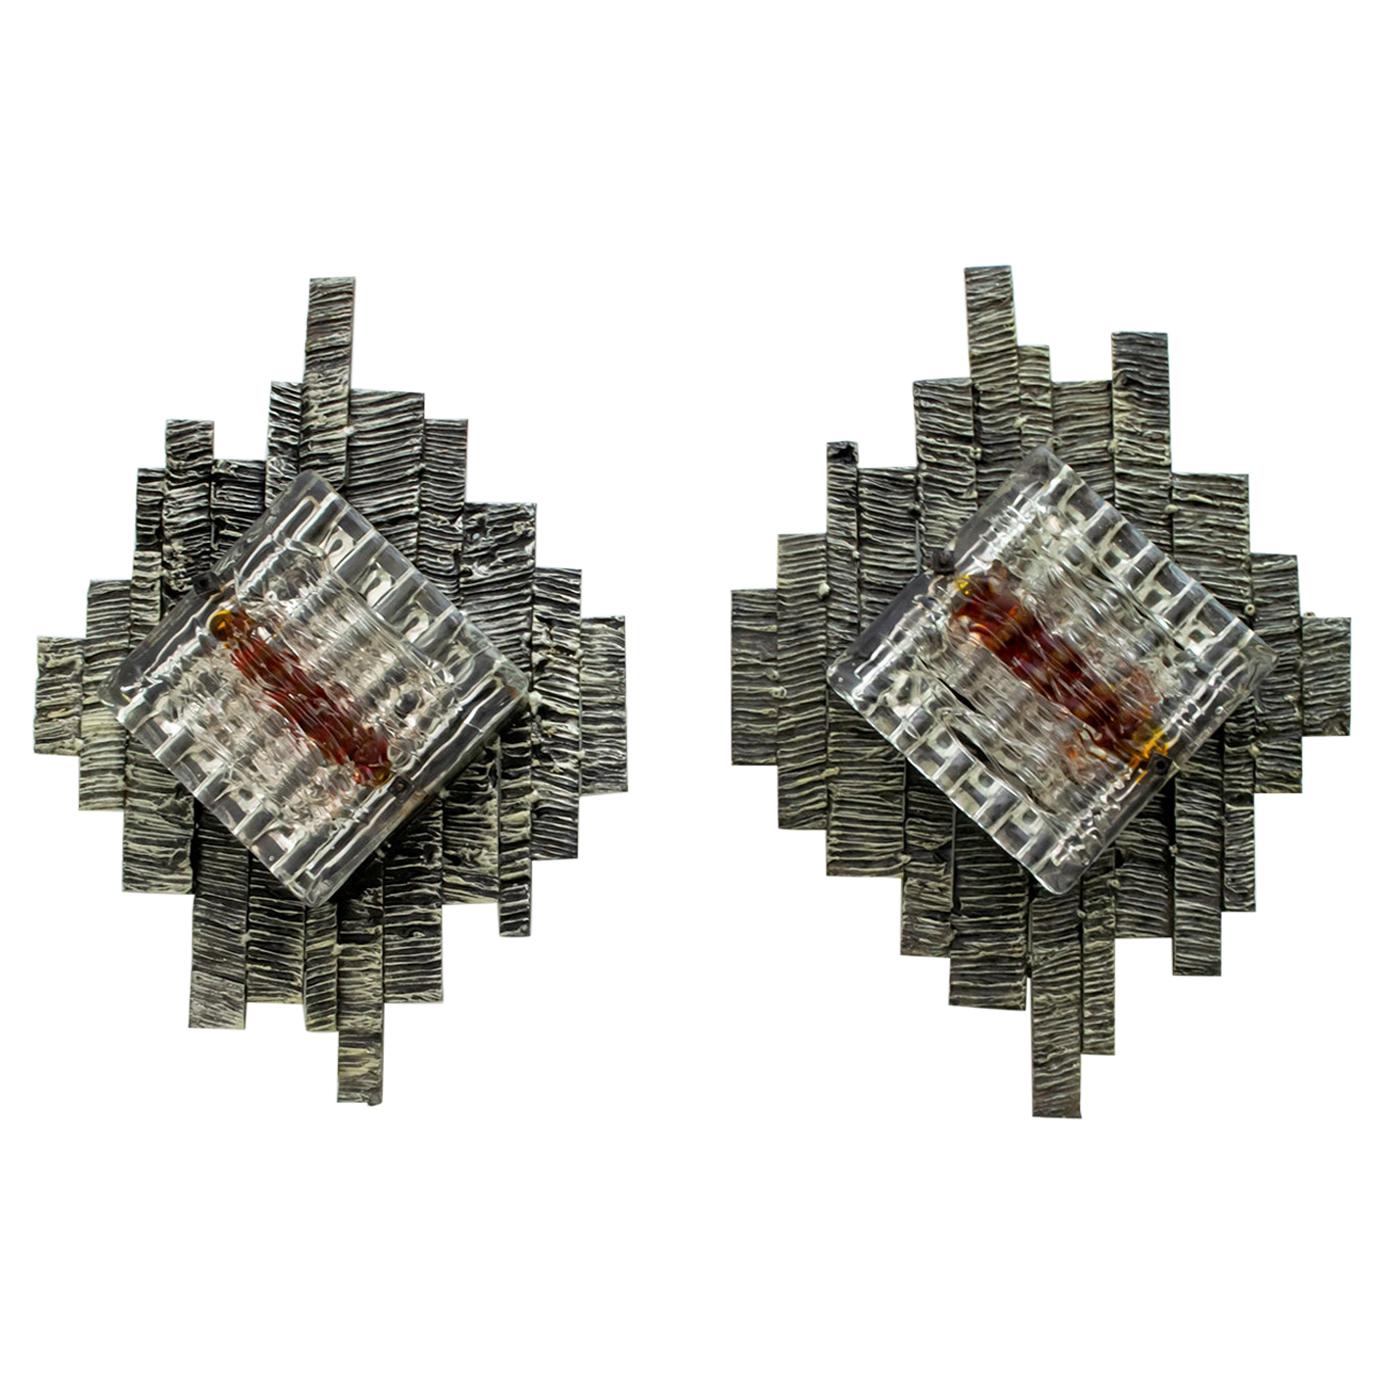 Pair of Albano Poli Brutalist Style Murano Glass Sconces by Poliarte, 1970s For Sale